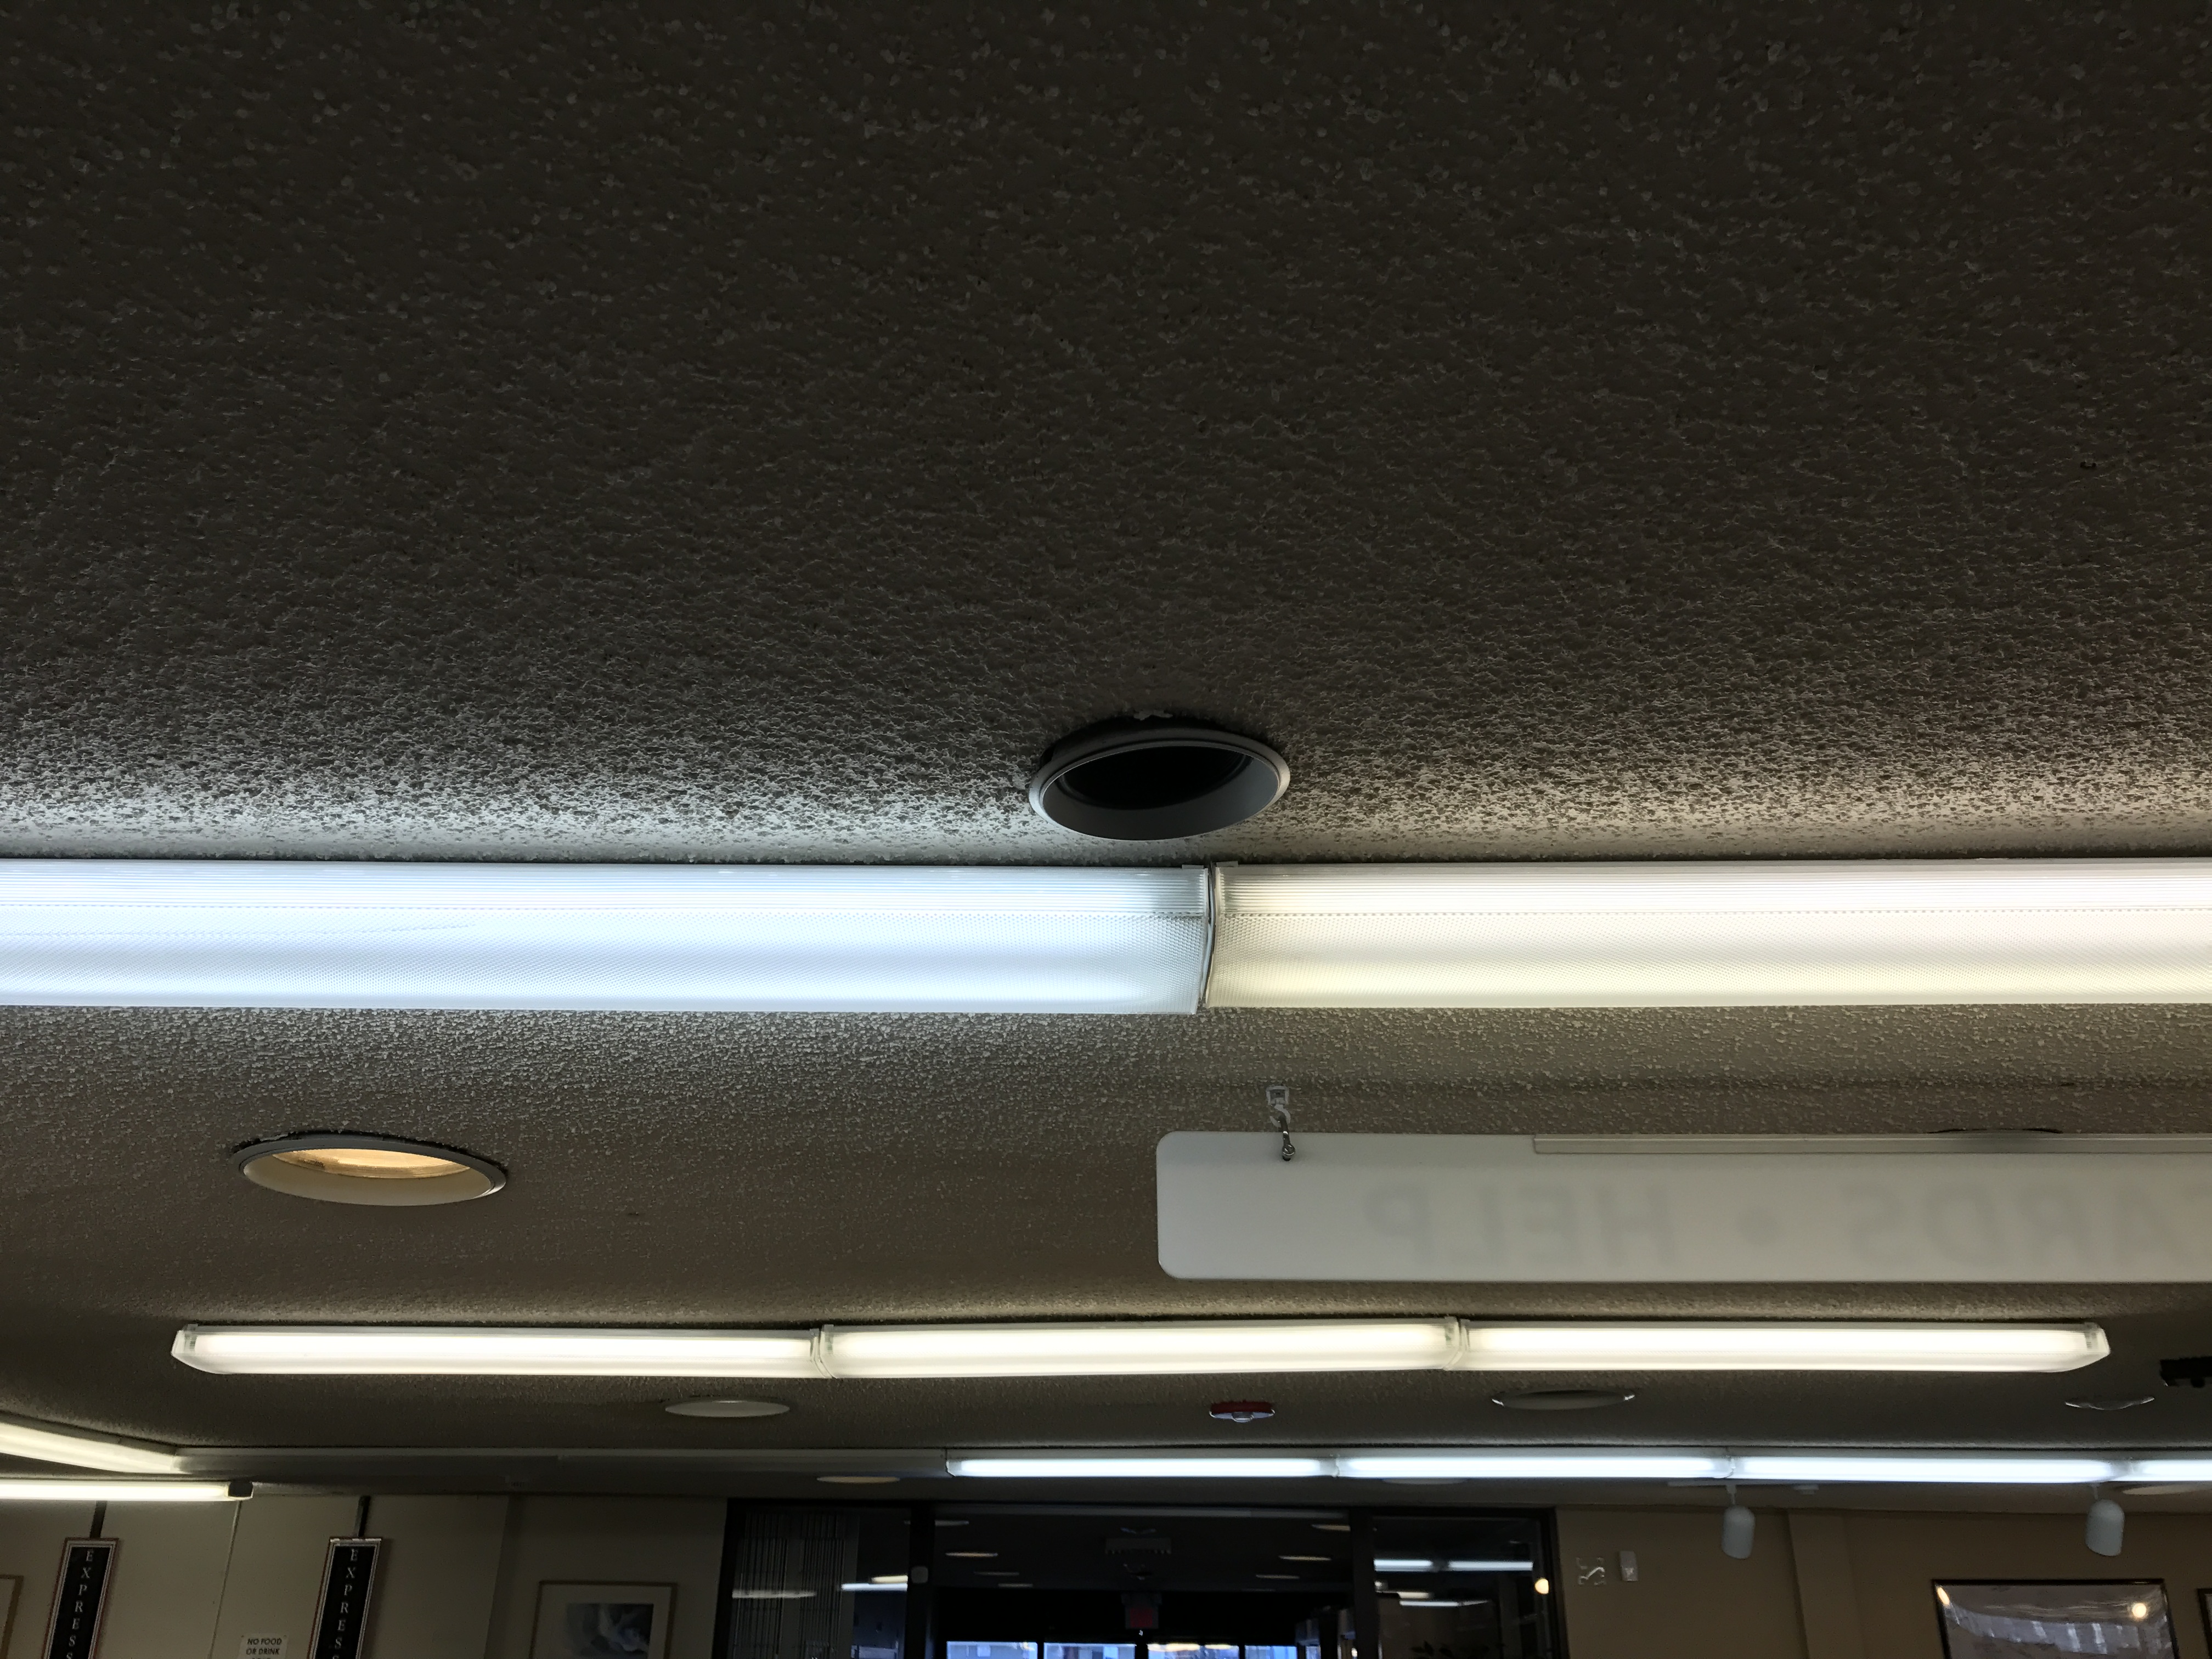 Carson City Public Library received new energy efficient lights during a recent performance contracting project. This picture shows the library’s first newly installed energy efficient light (top left) next to less efficient incandescence lights.